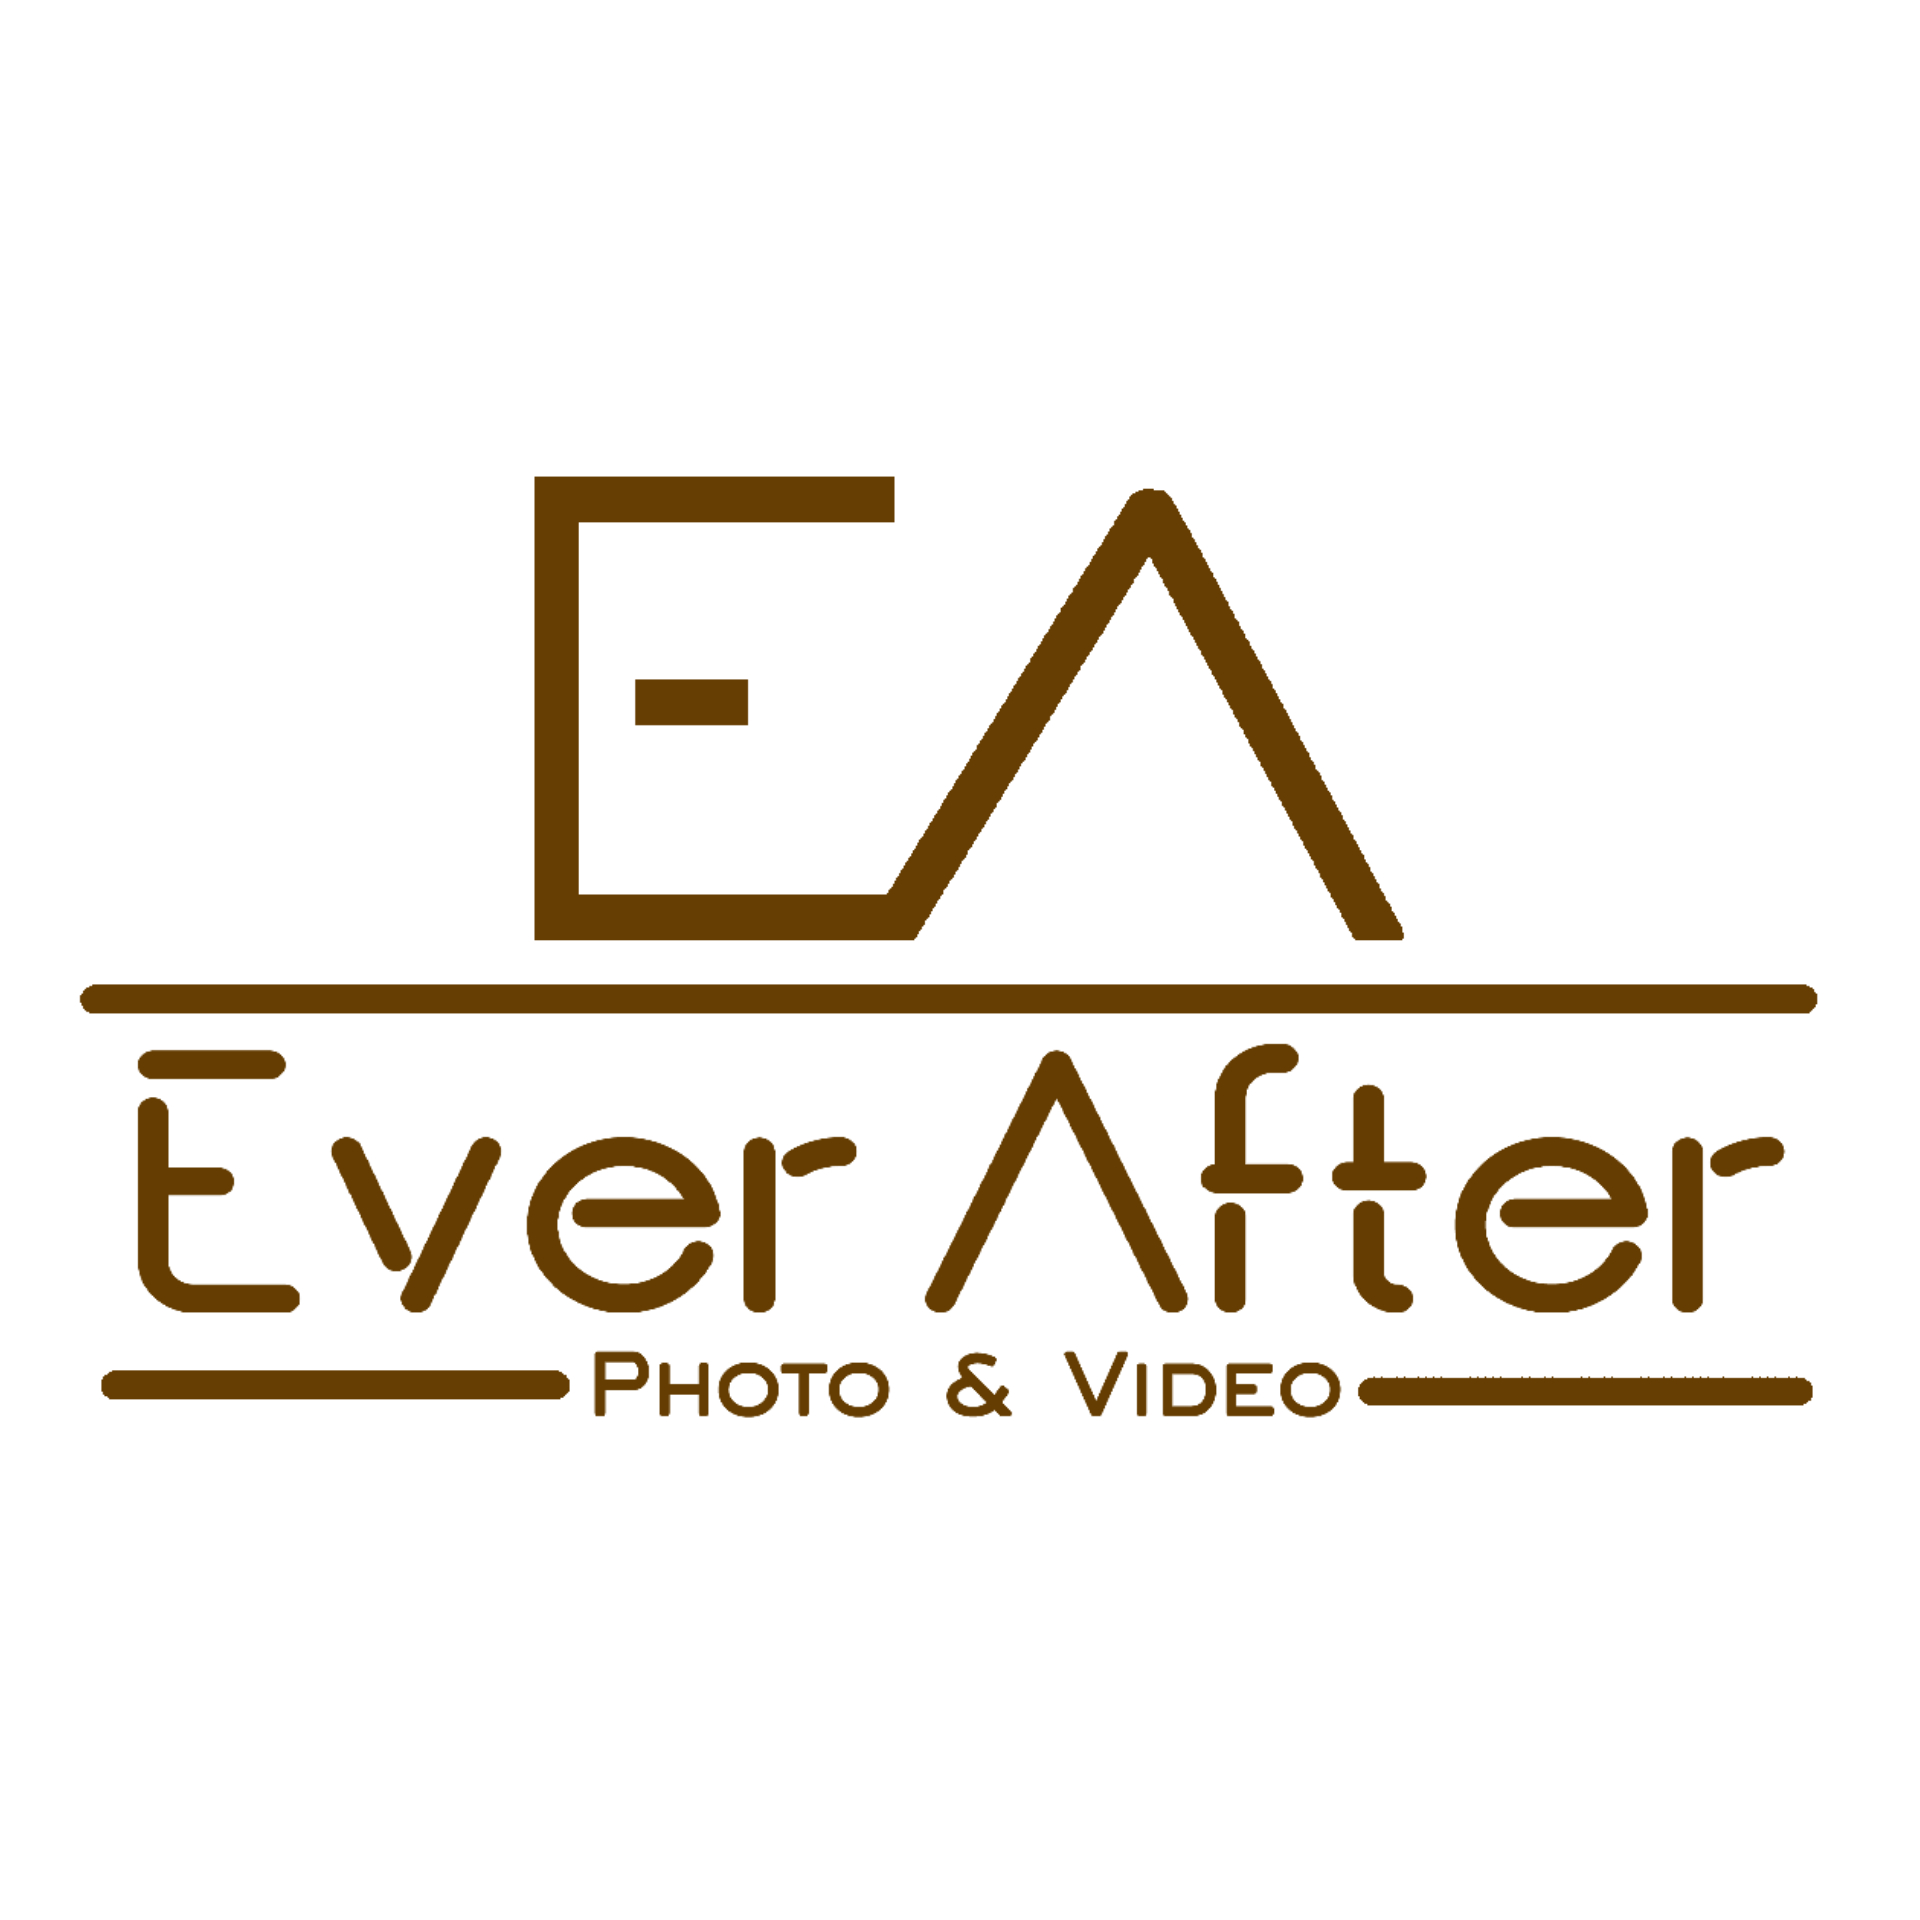 Ever after